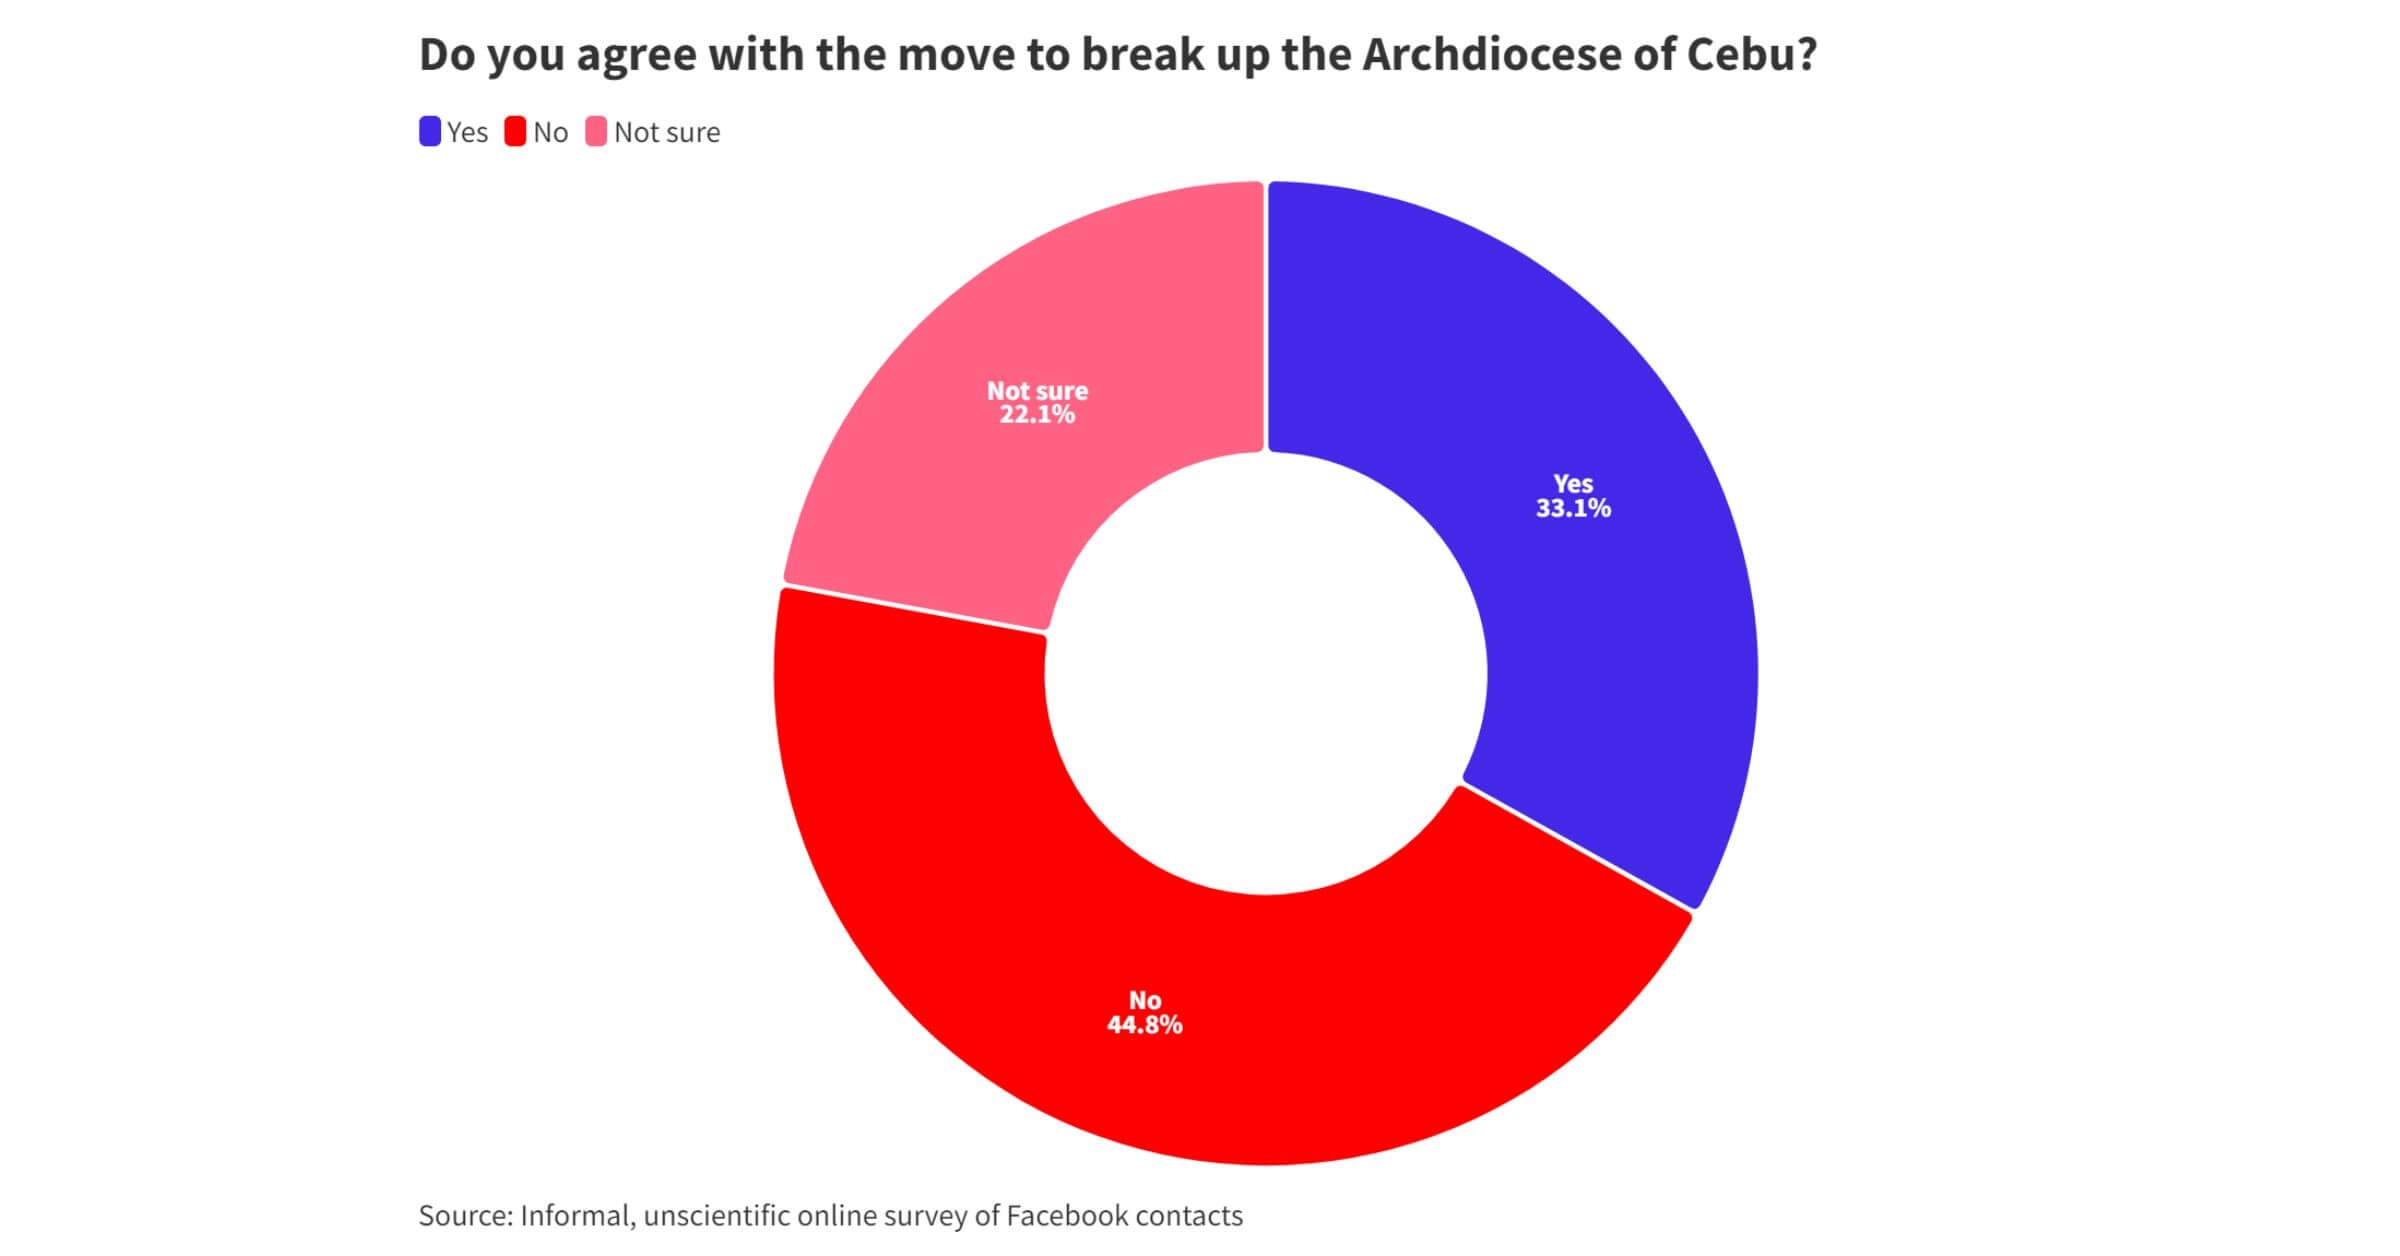 Informal Sugbuswak survey: Consultations not adequate; support low for breaking up Archdiocese of Cebu